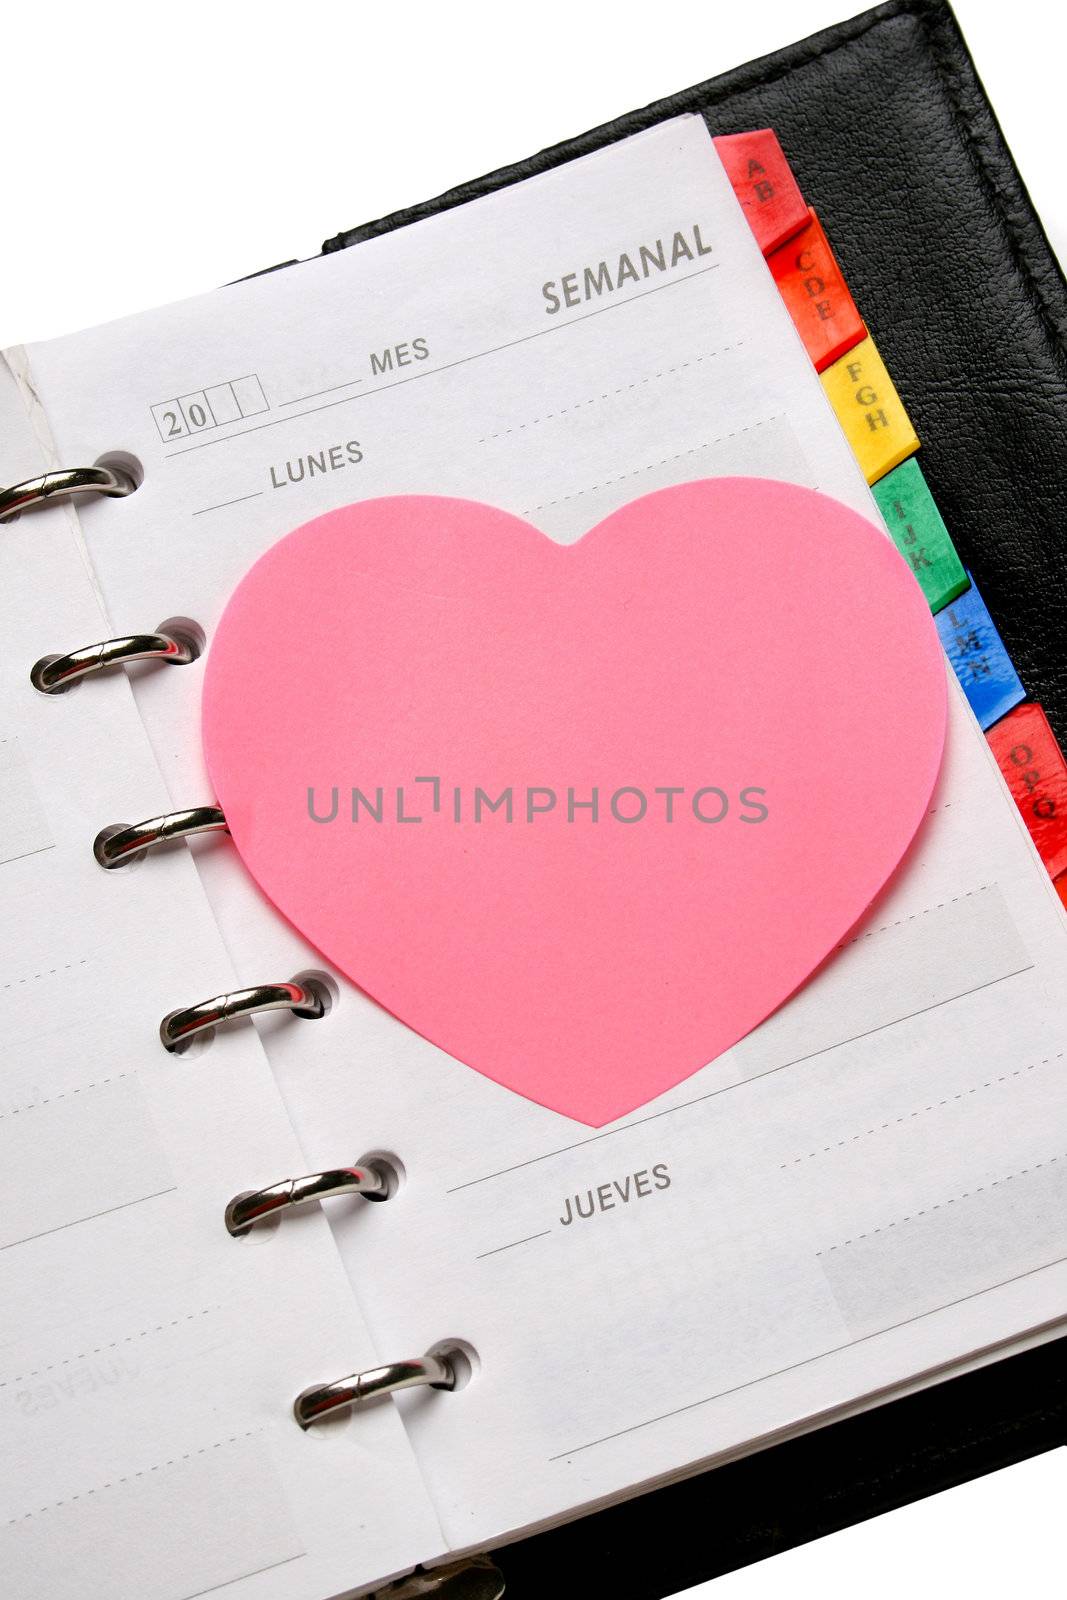 Dairy planer with heart shape sticky note